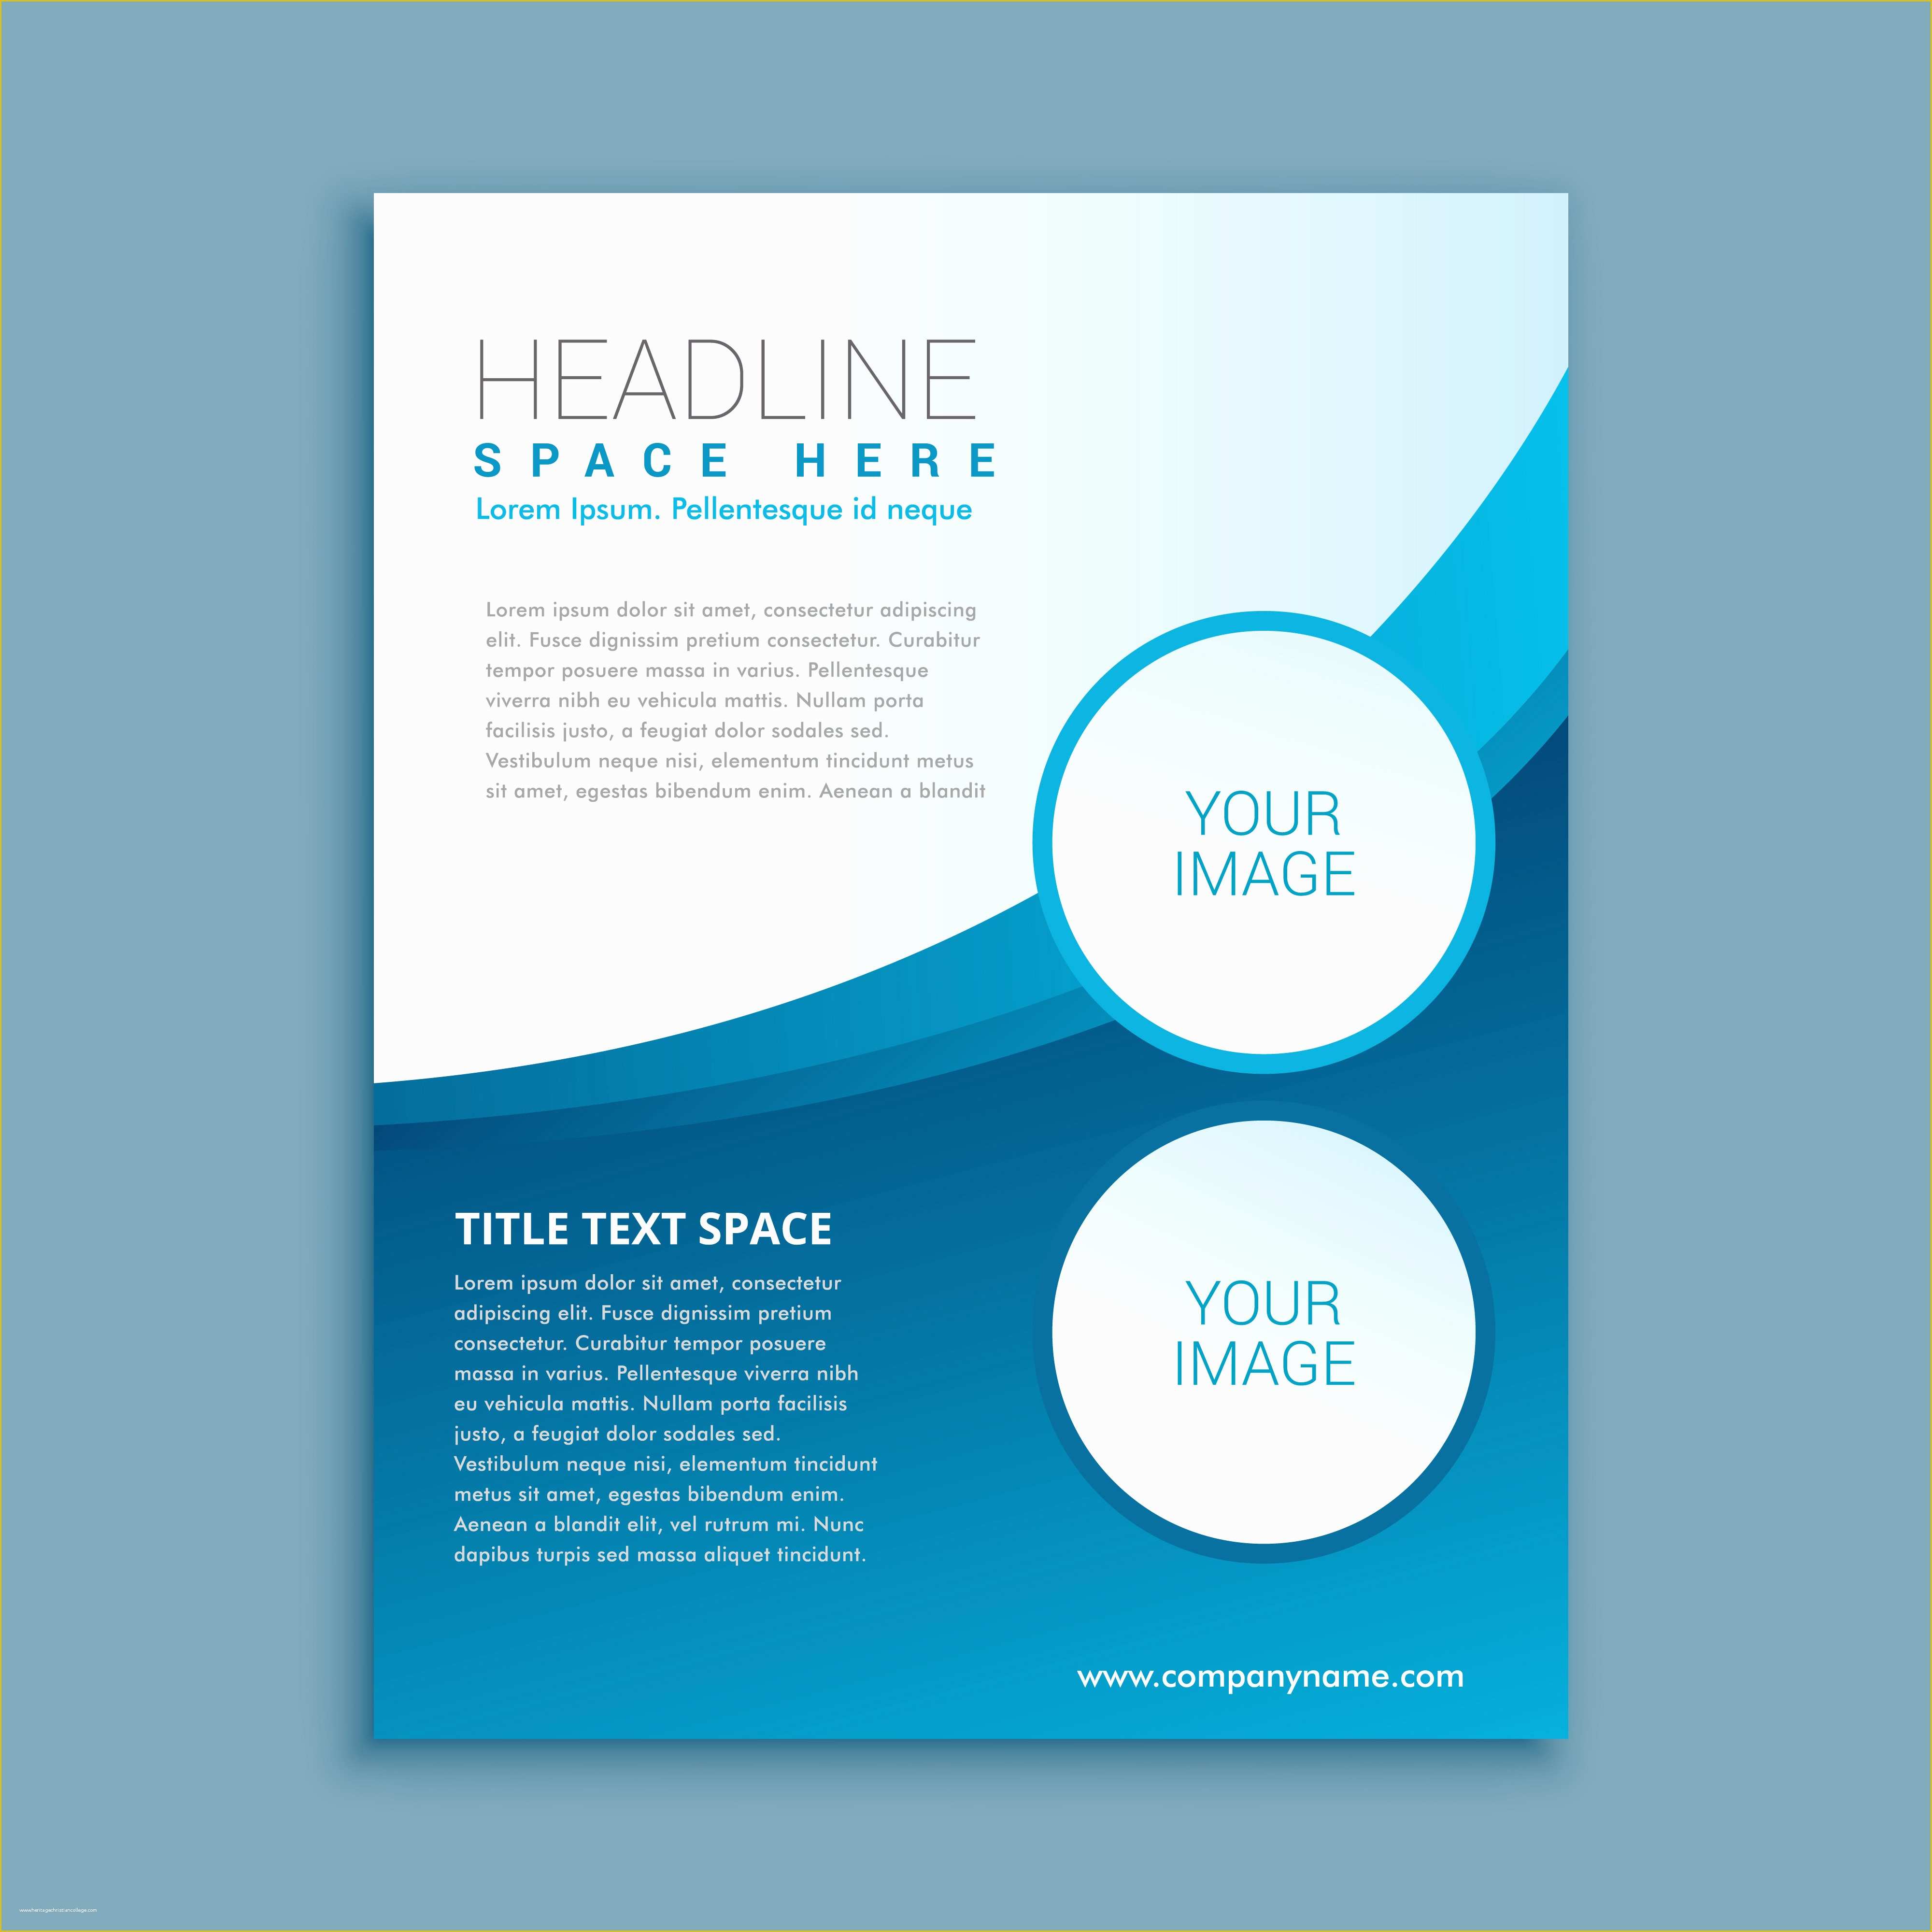 Free Flyer Design Templates Of Business Brochure or Flyer Design Template Download Free